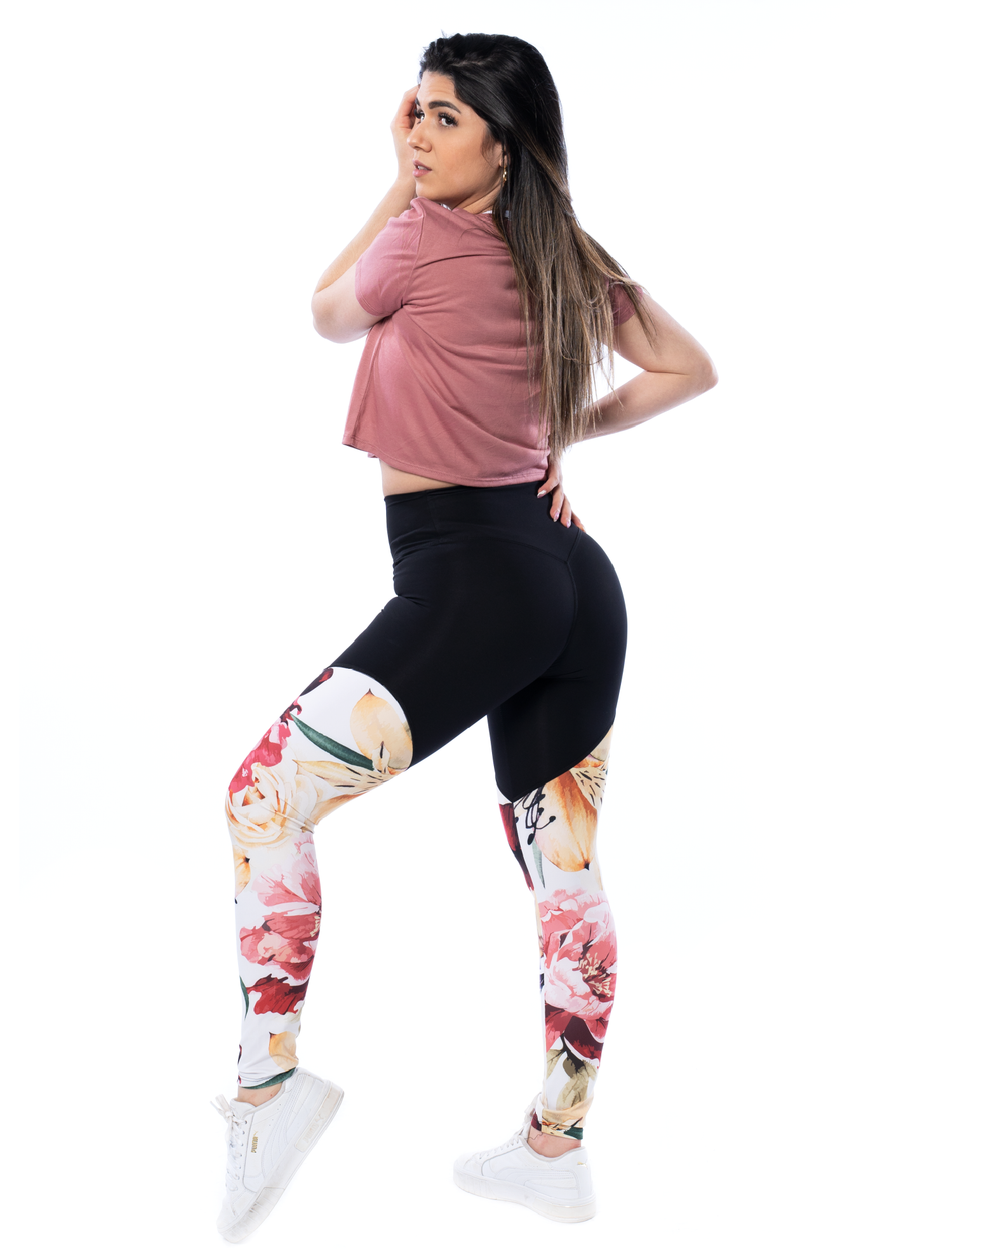 Covalent Activewear - Applause Dancewear and Designs